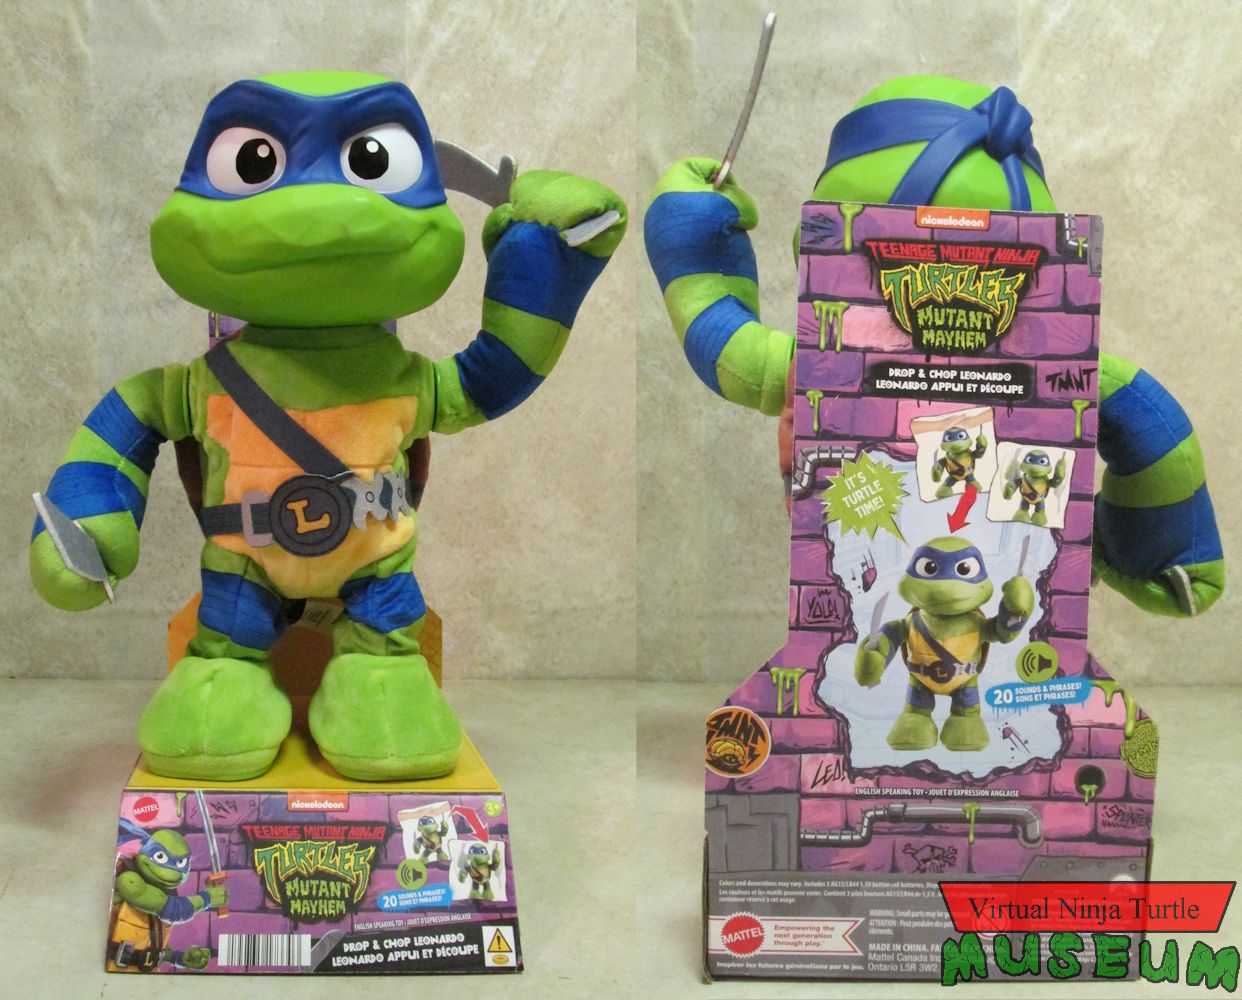 Drop And Chop Leonardo packaging front and back